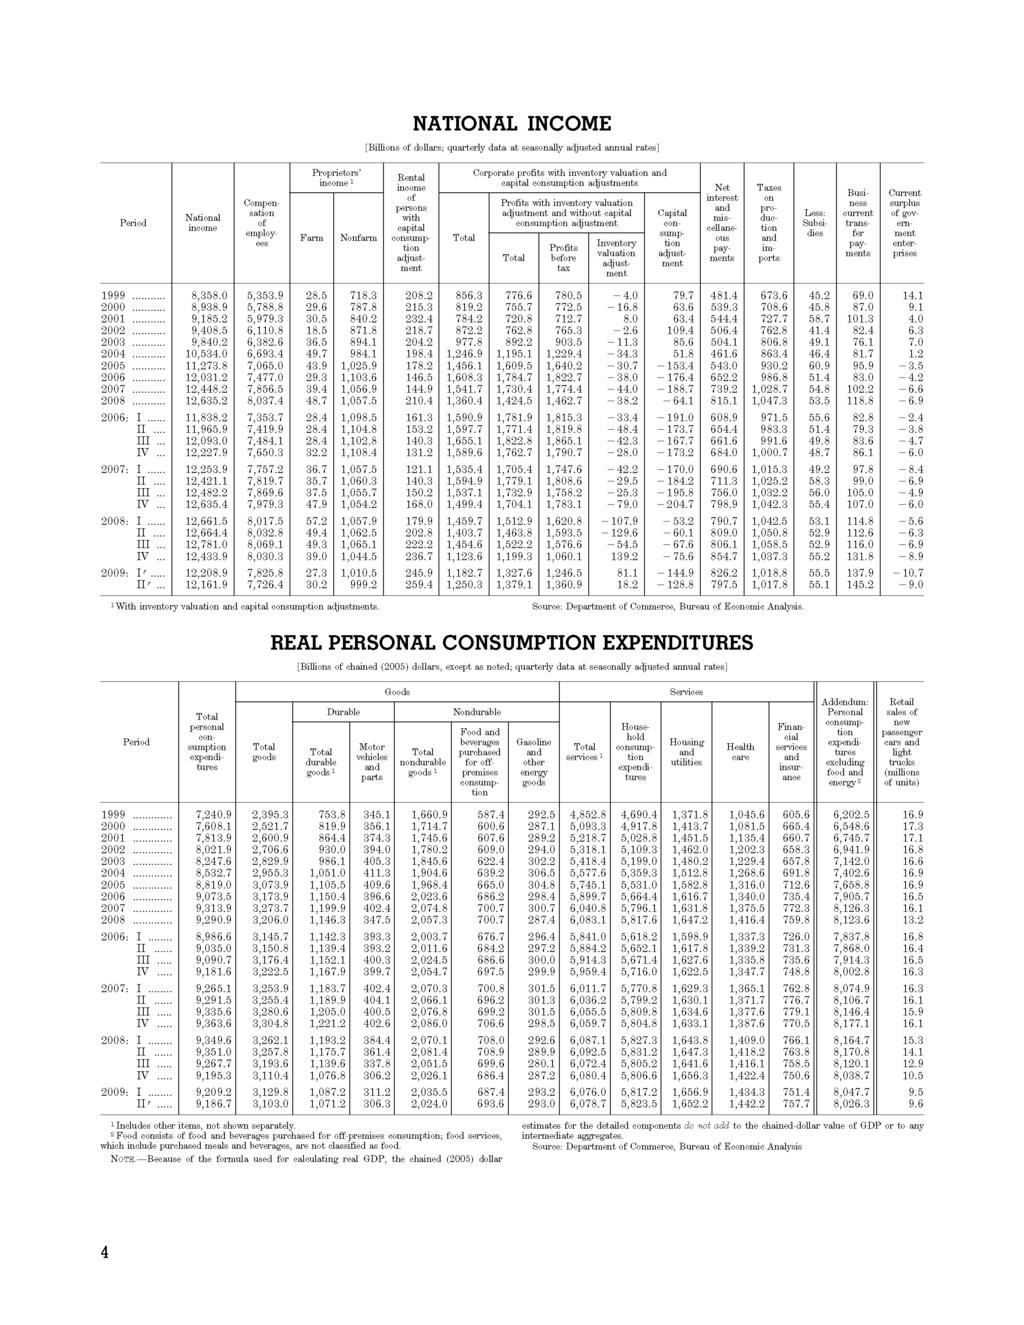 NATIONAL INCOME [Billions of dollars; quarterly data at seasonally adjusted annual rates] National income Compensation of employees Farm Proprietors' income Nonfarm Rental income of persons with